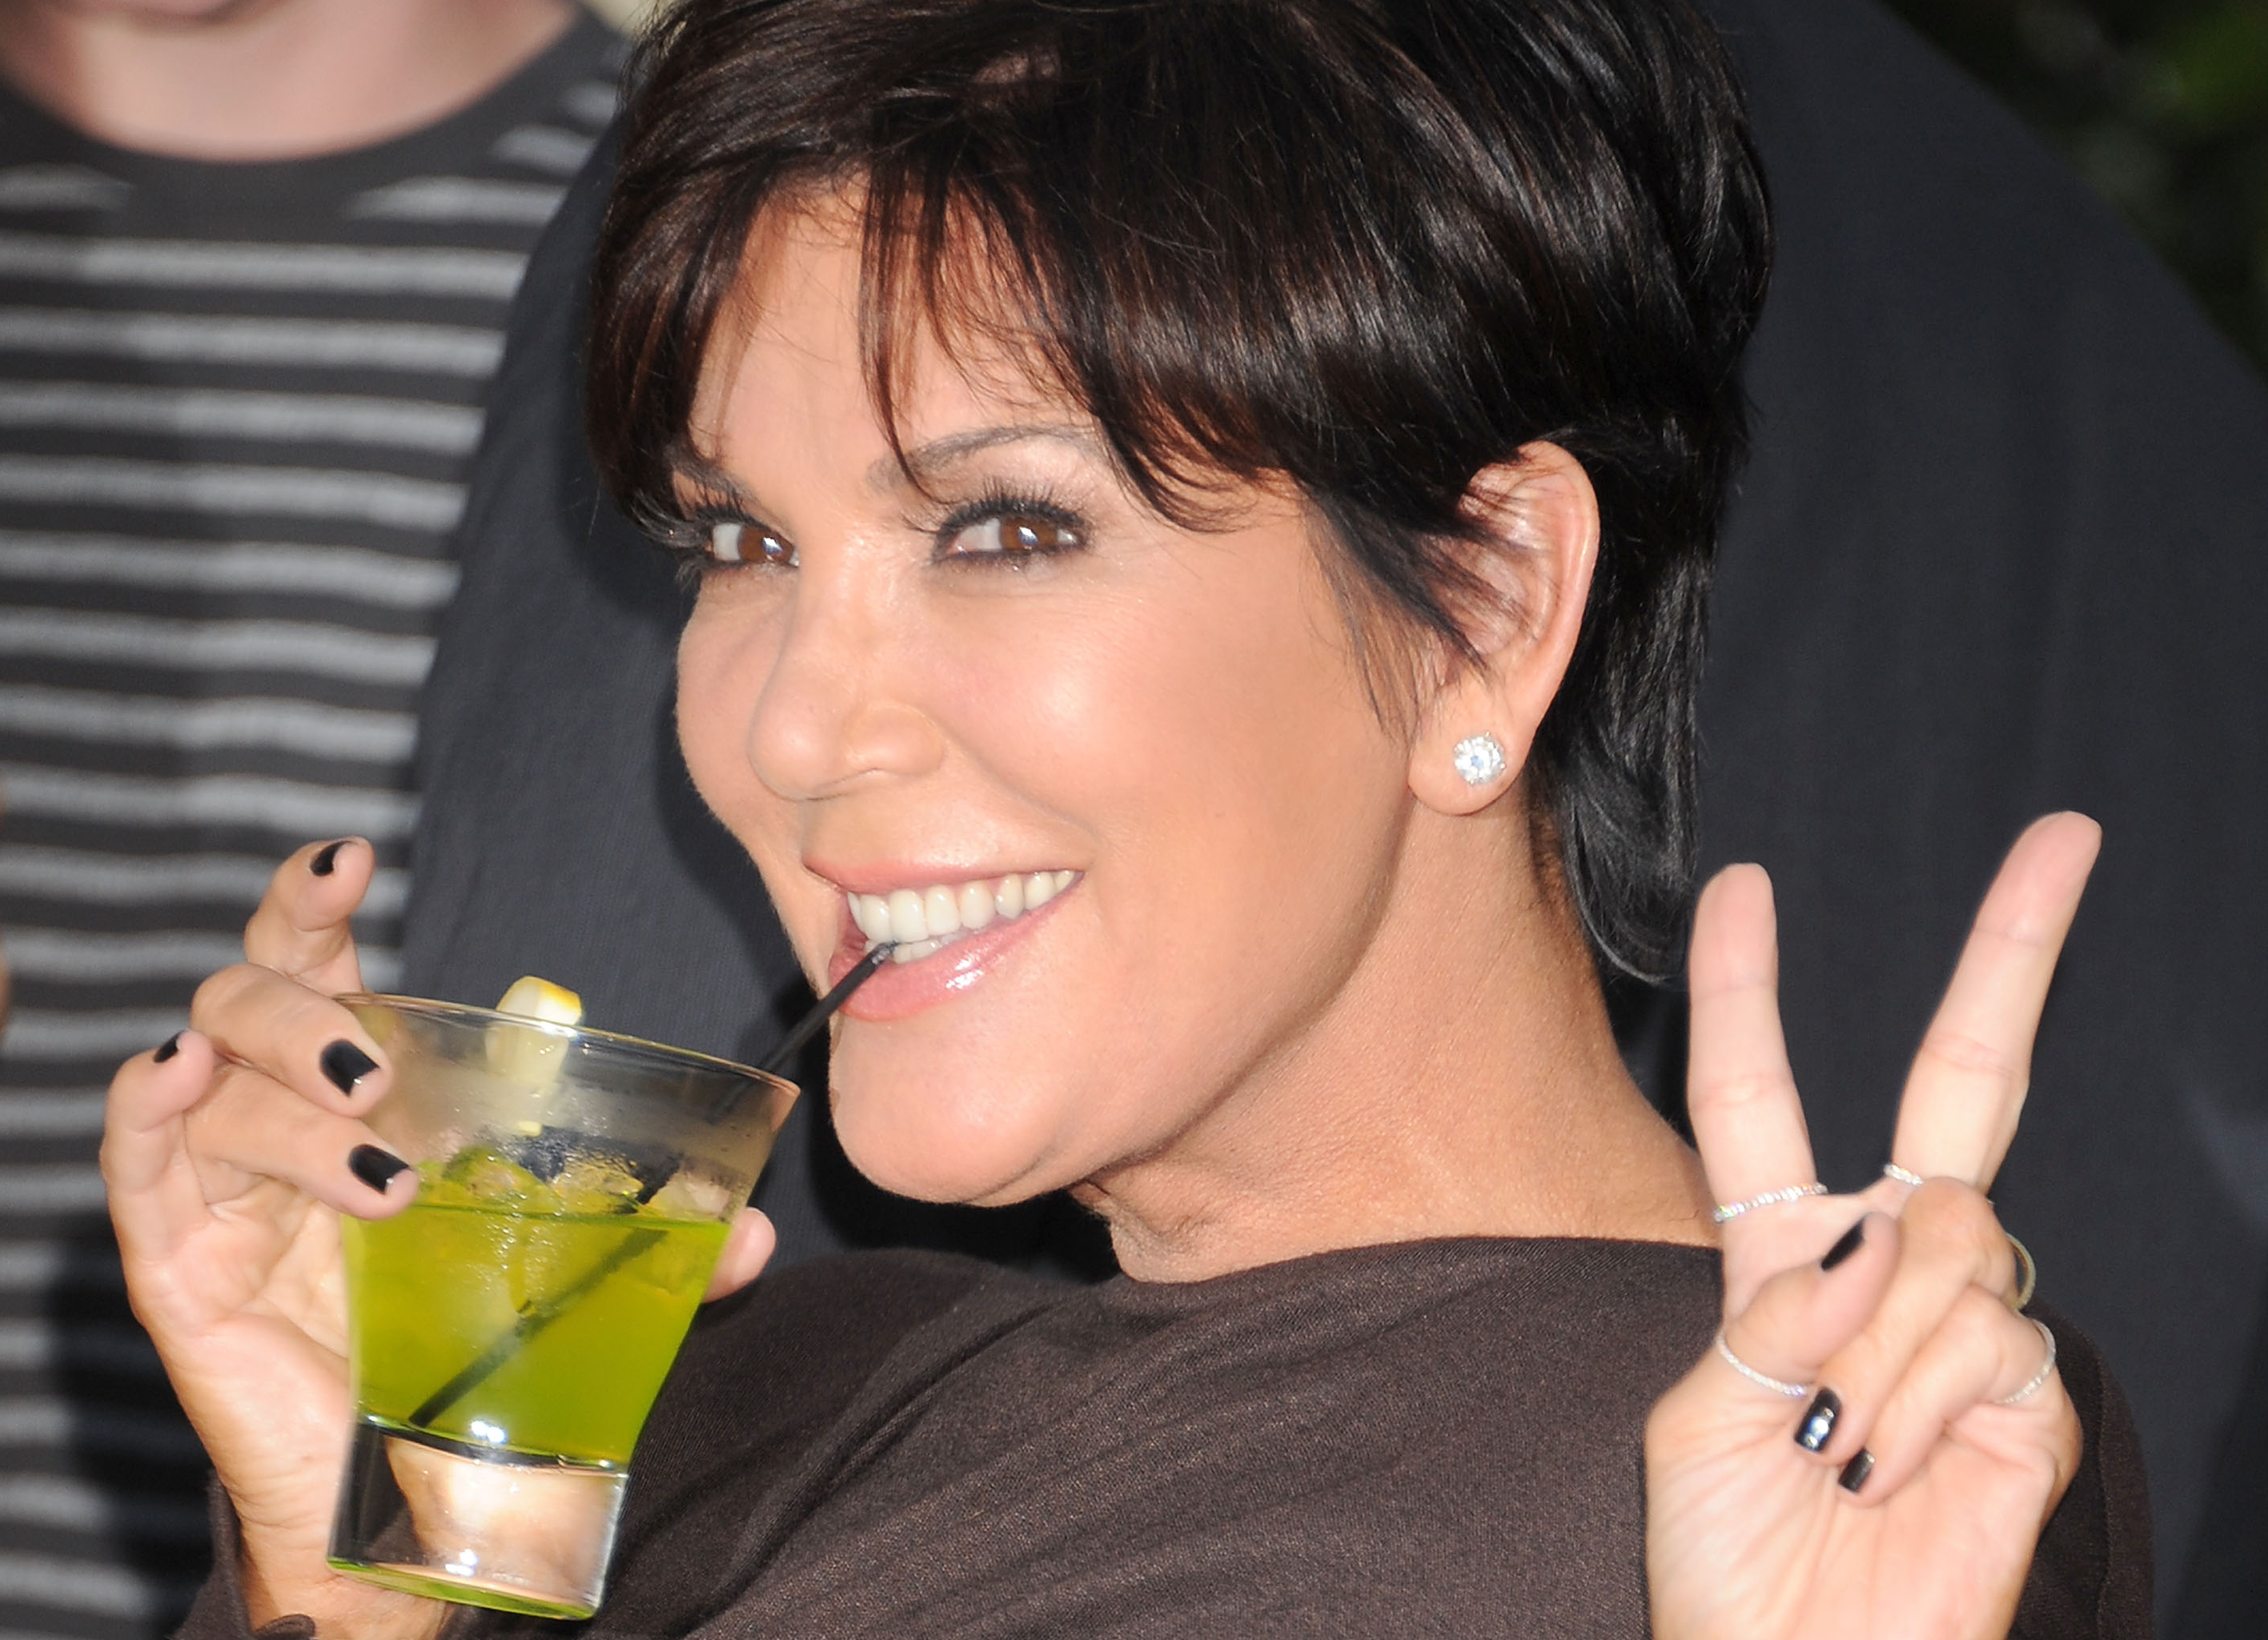 Munted Kris Jenner Singing To Spice Girls Is The Ultimate Kris Jenner